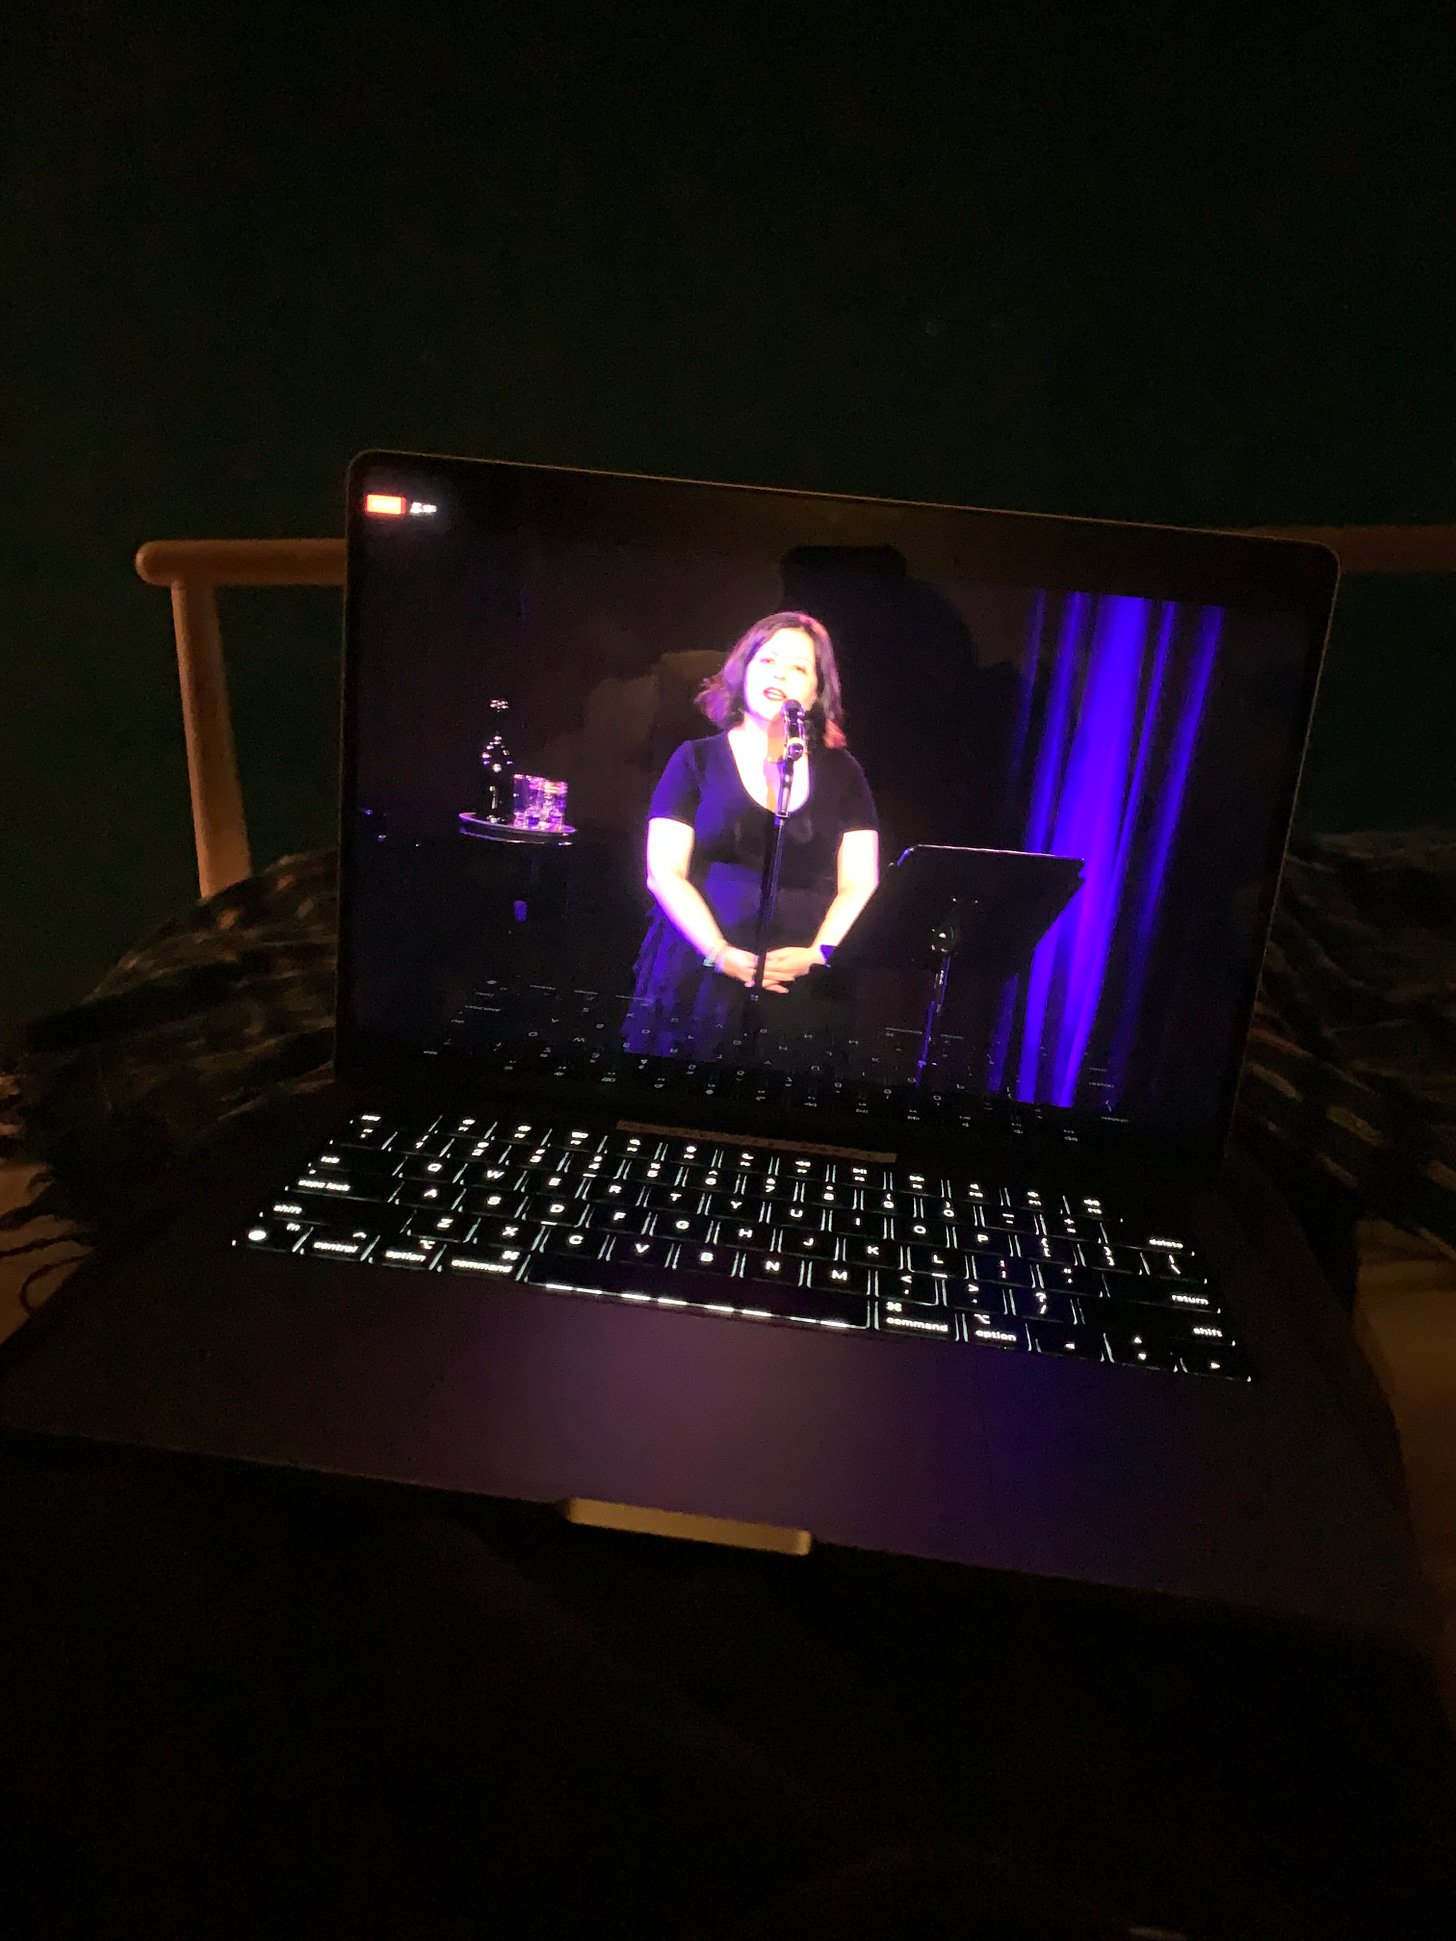 A white woman dressed in a black dress stands on a stage behind a microphone, singing. This image is on a computer sitting on the lap of a person in a dark room.